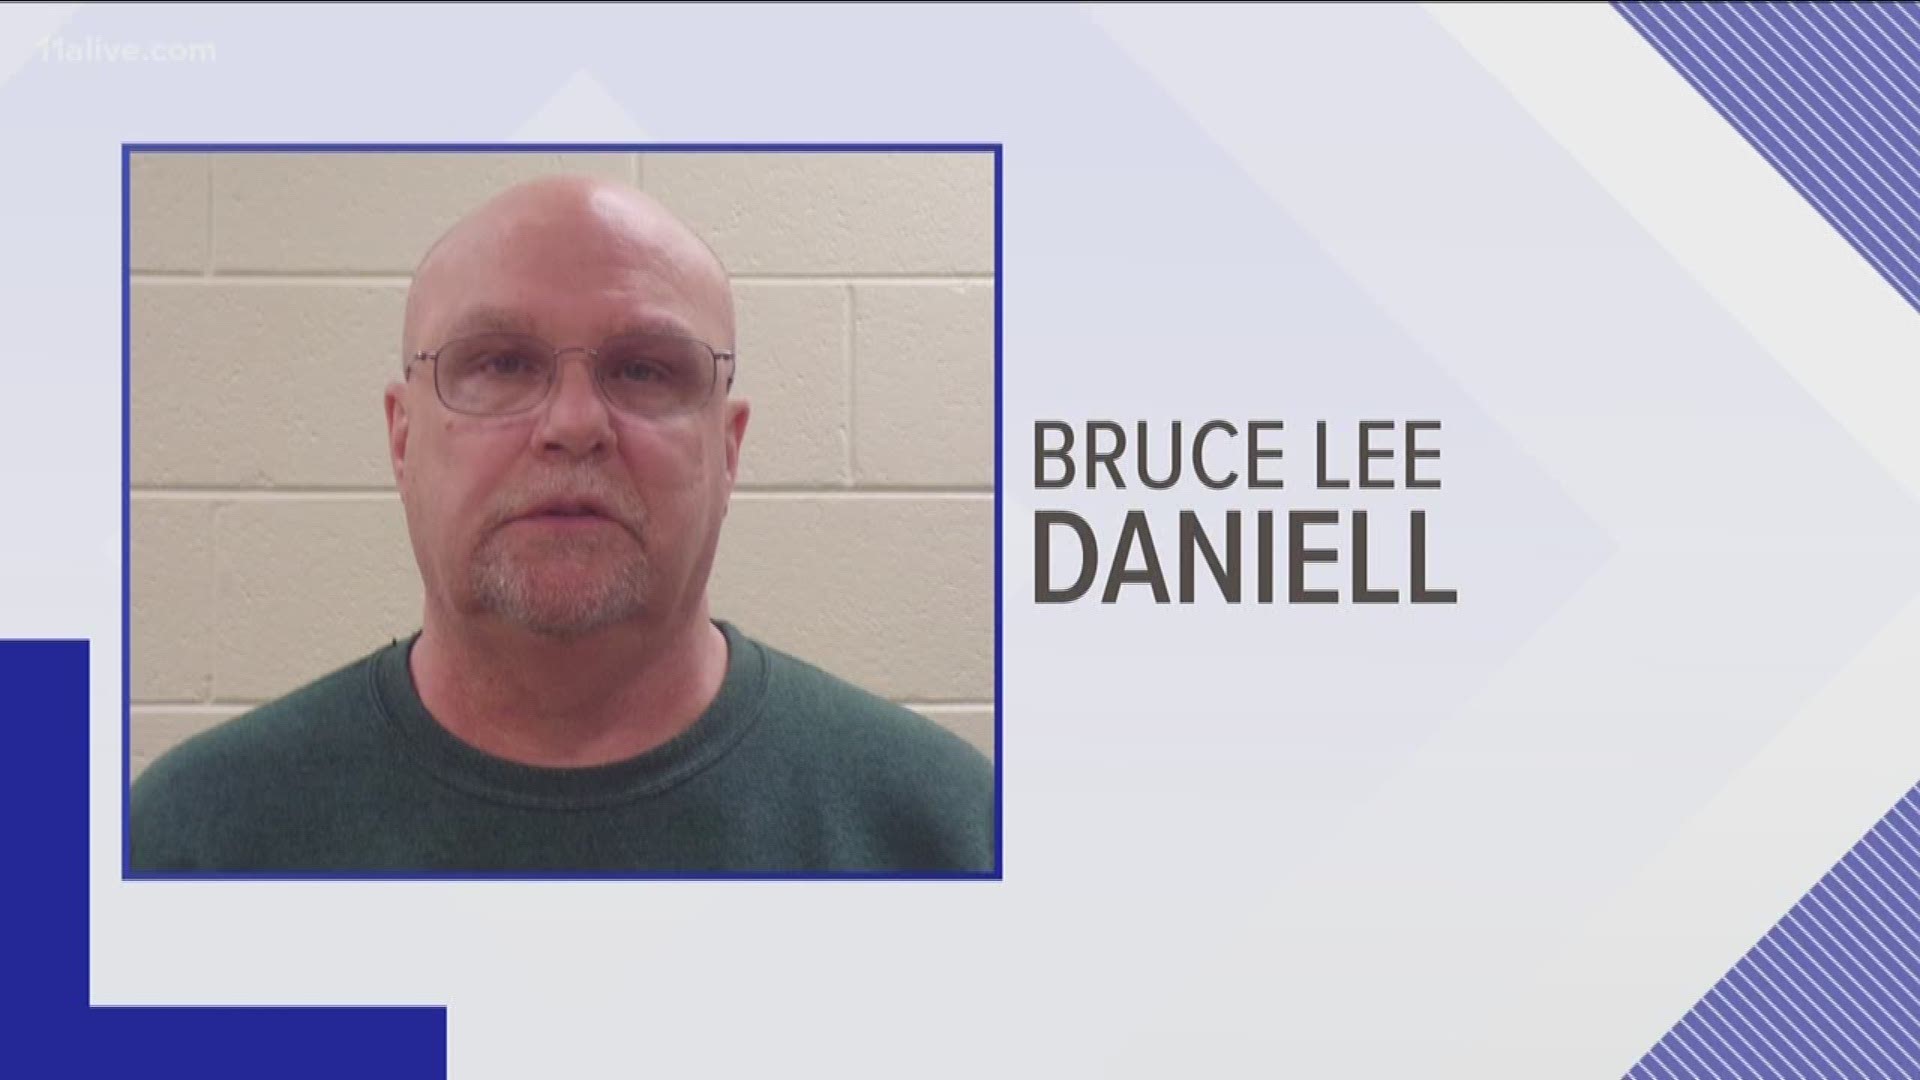 He was arrested within 5 minutes of entering the Pickens County school, officials say.